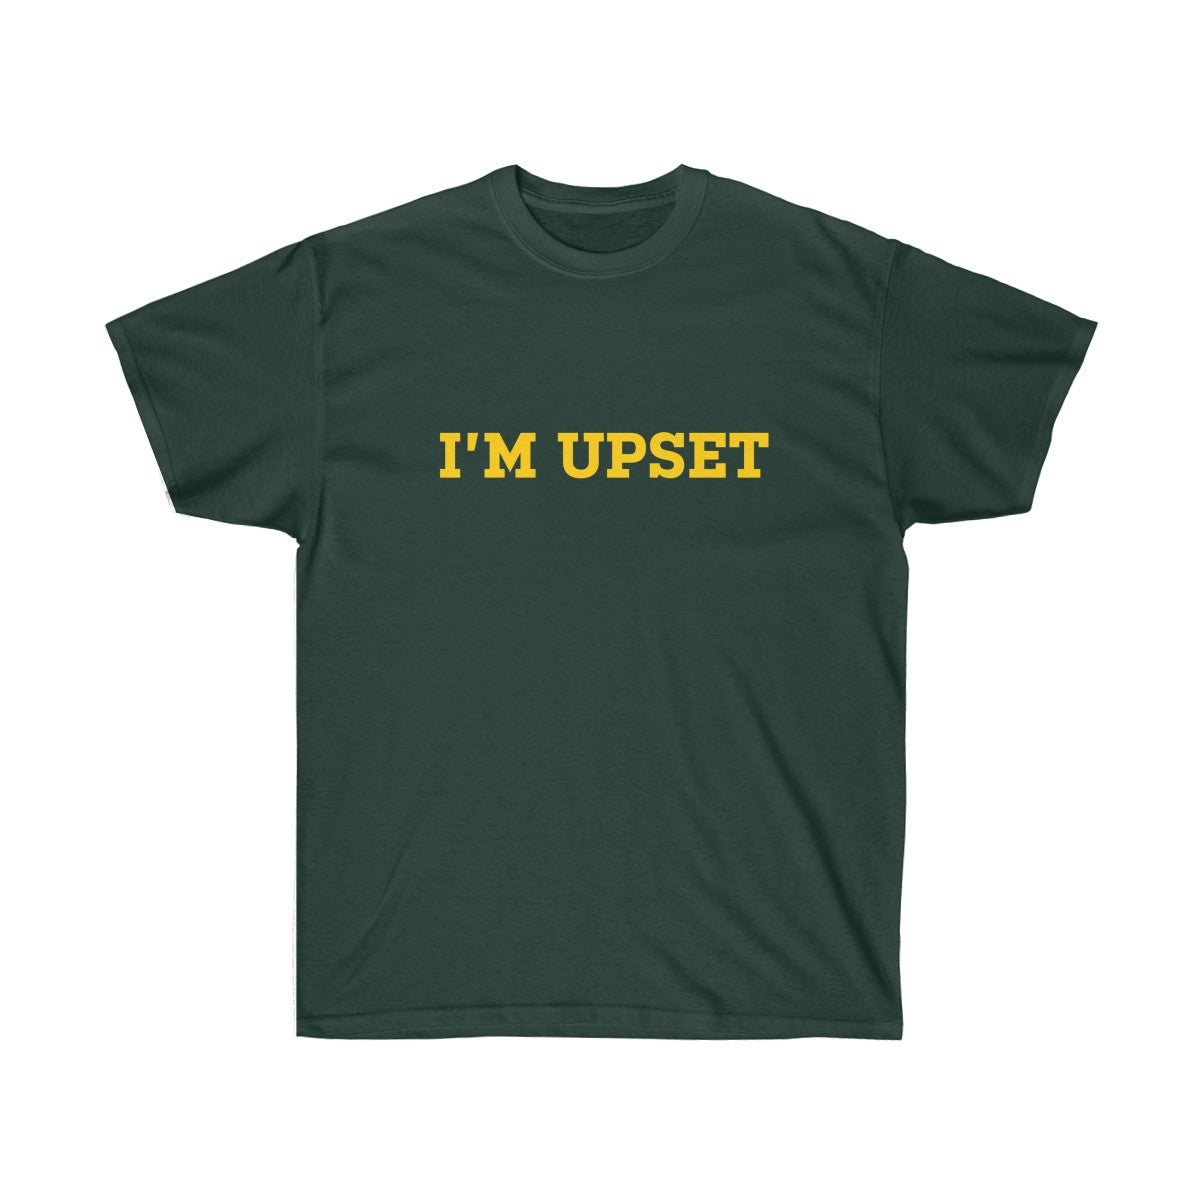 I'm Upset Tee - Drizzy Drake Scorpion inspired-Forest Green-S-Archethype